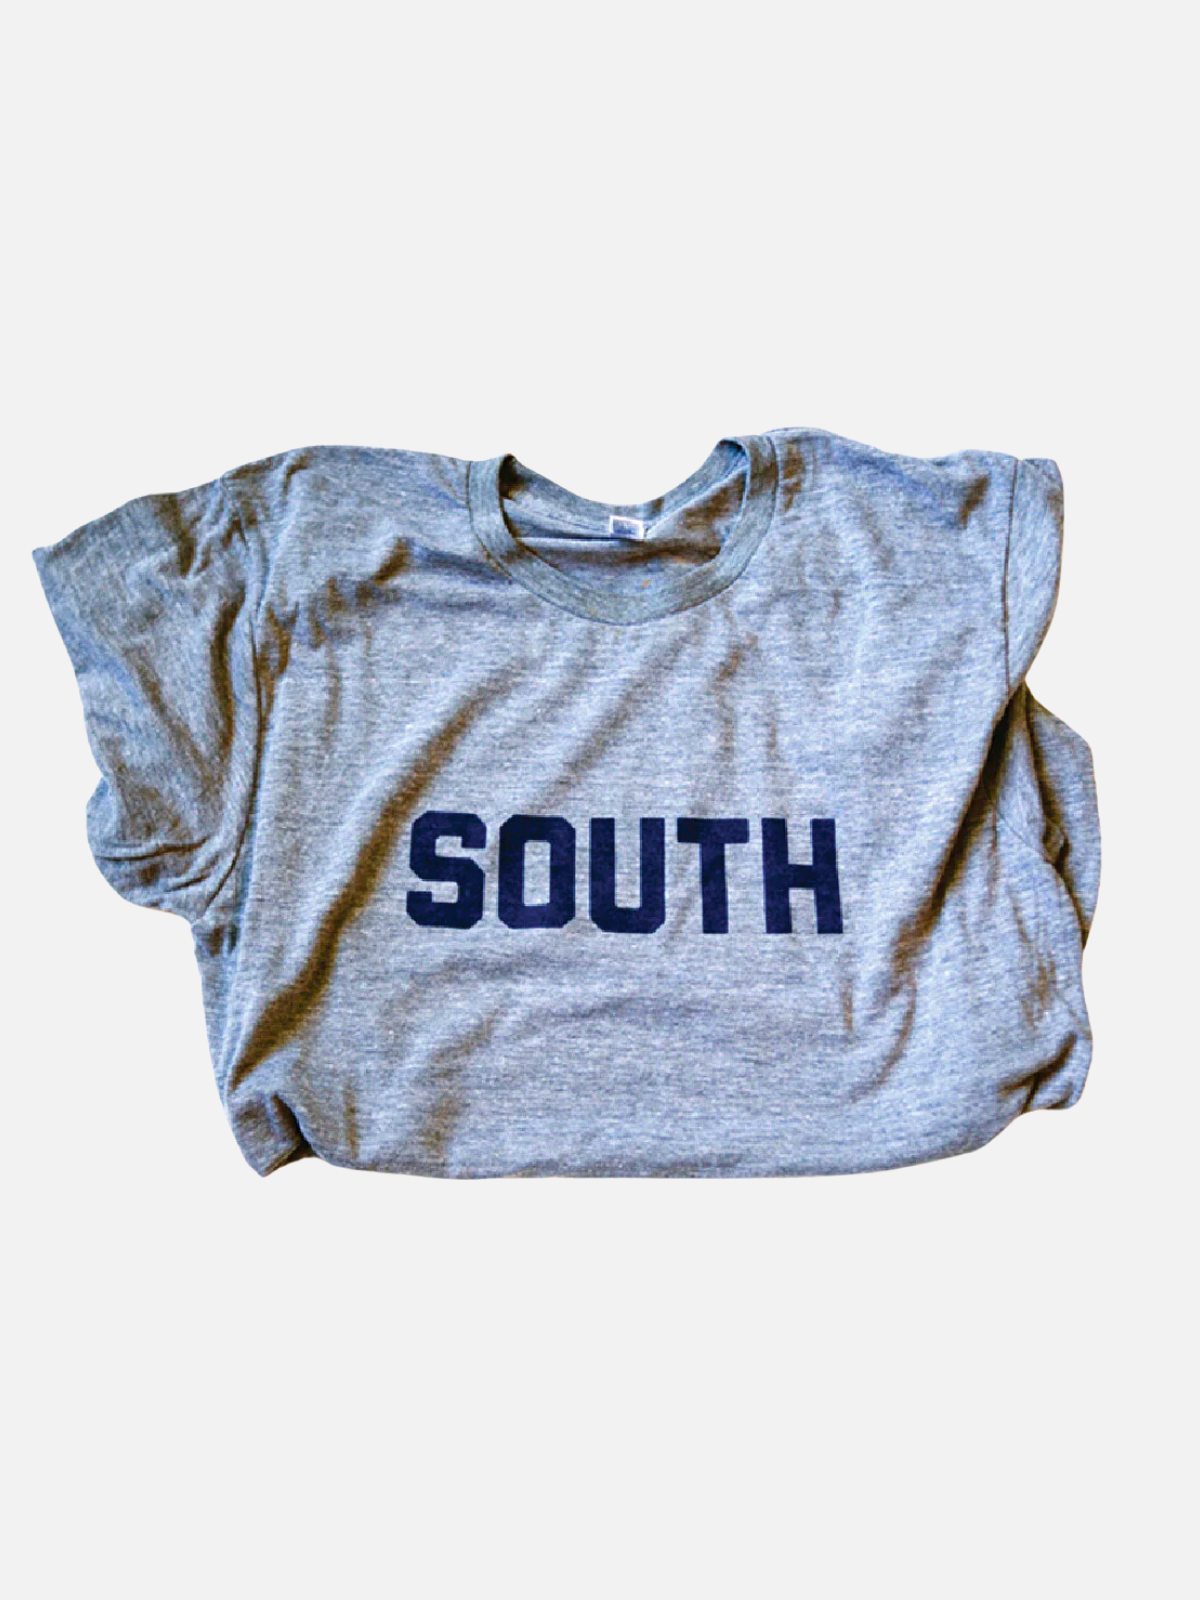 bitter southerner south tee lightweight cotton graphic t-shirt heather grey gray kempt athens ga georgia men's clothing store